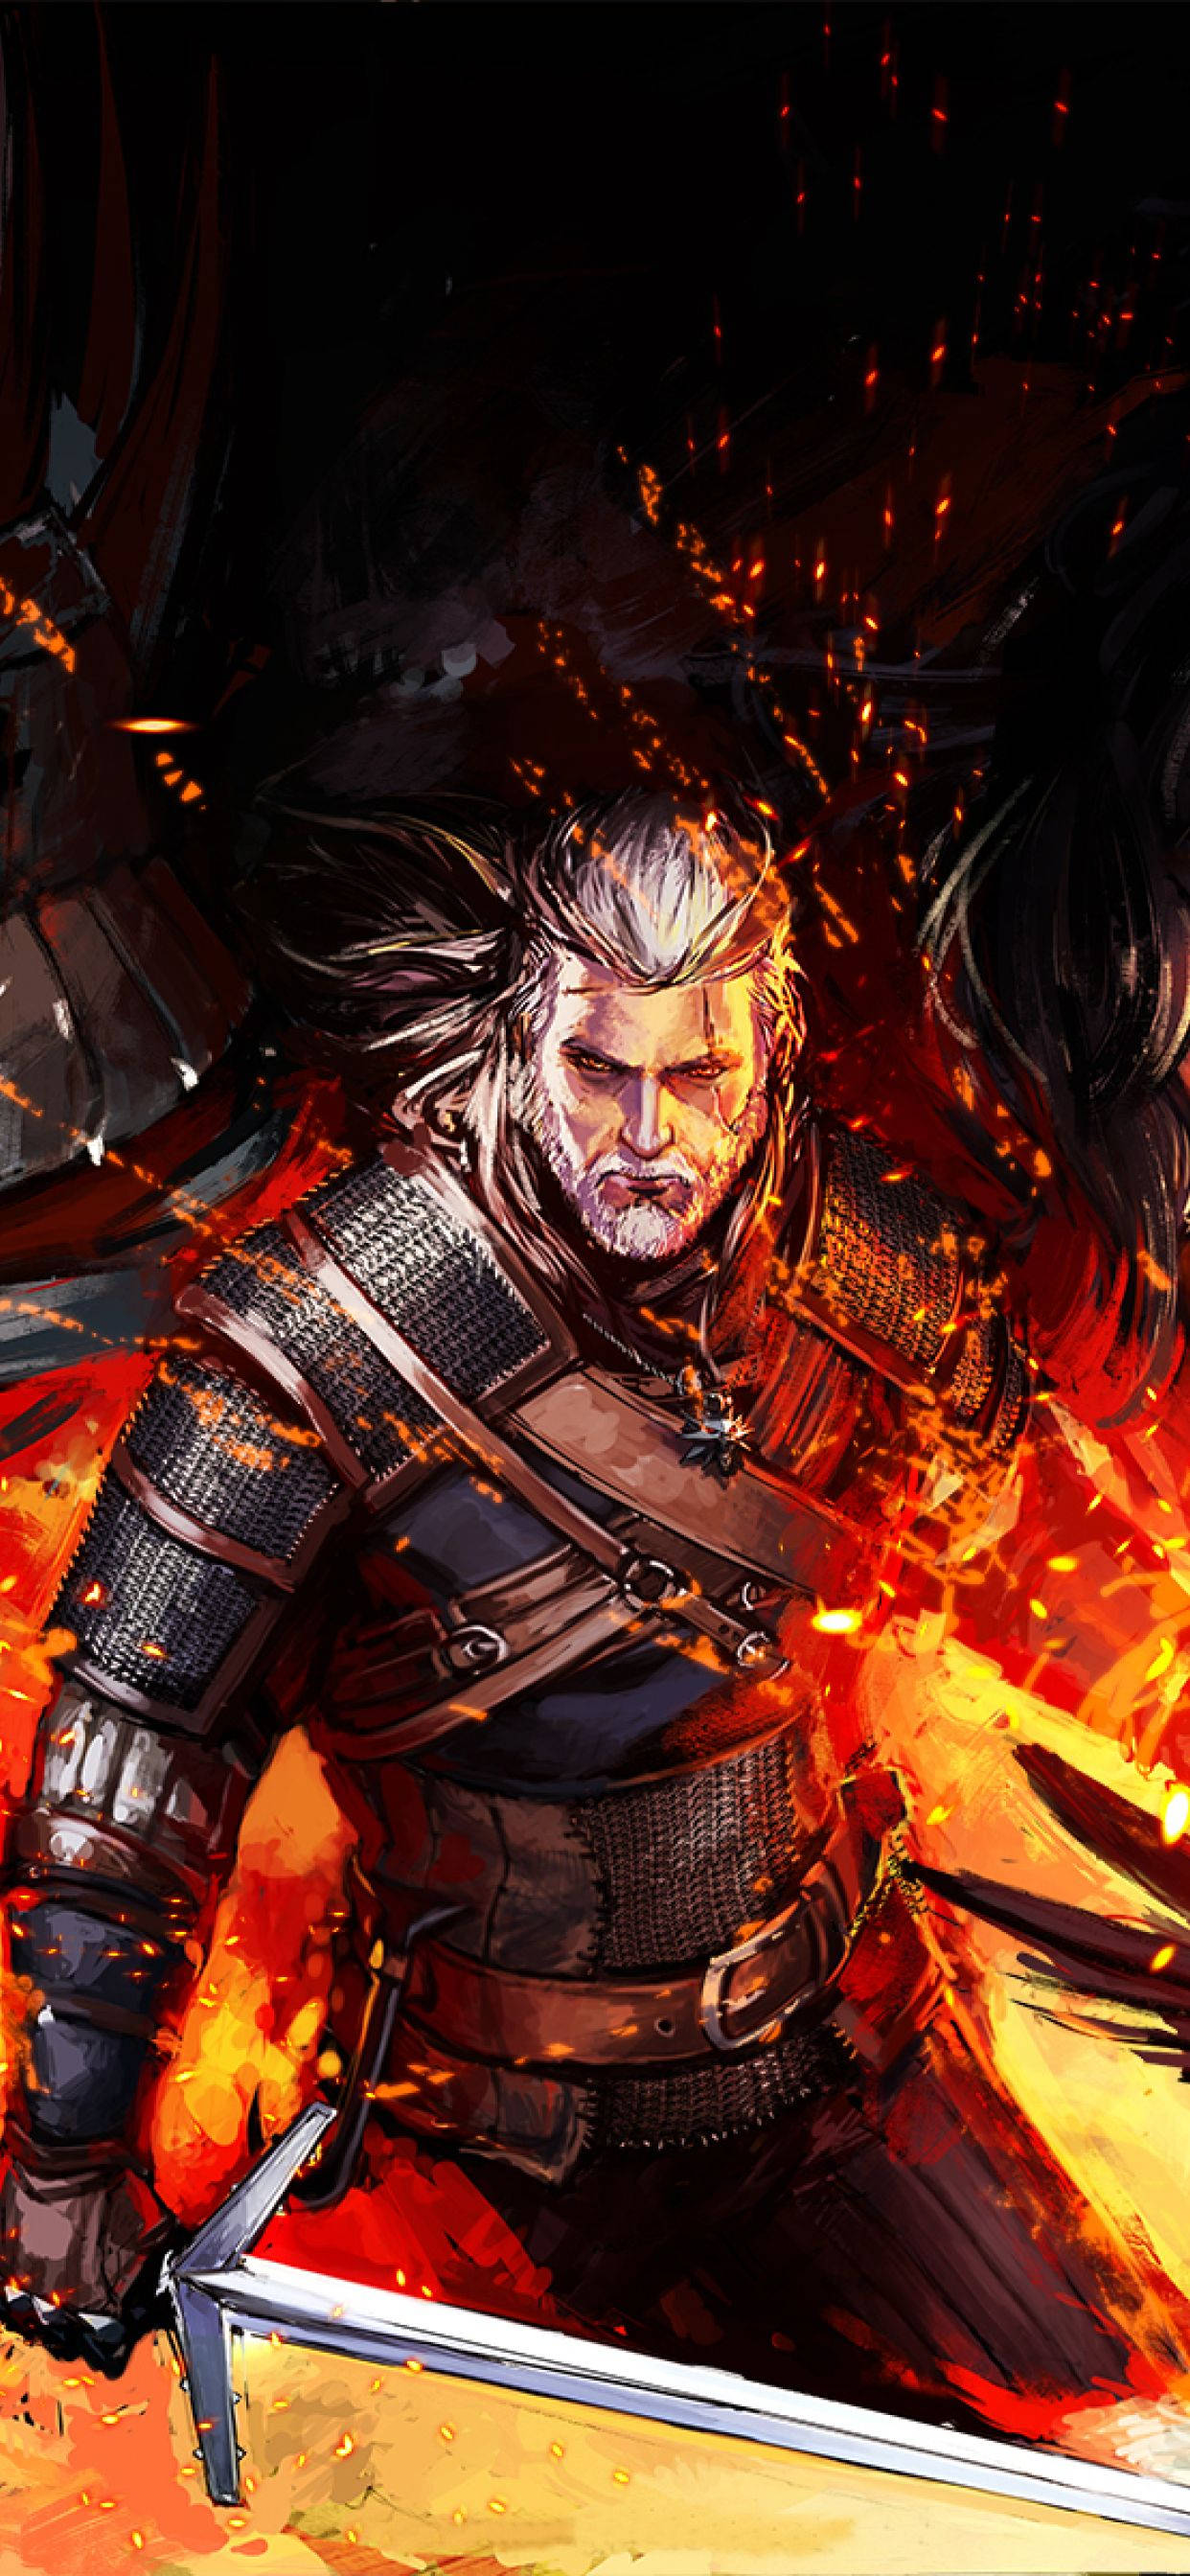 Download Geralt Using Igni In Witcher 3 Iphone Wallpaper 